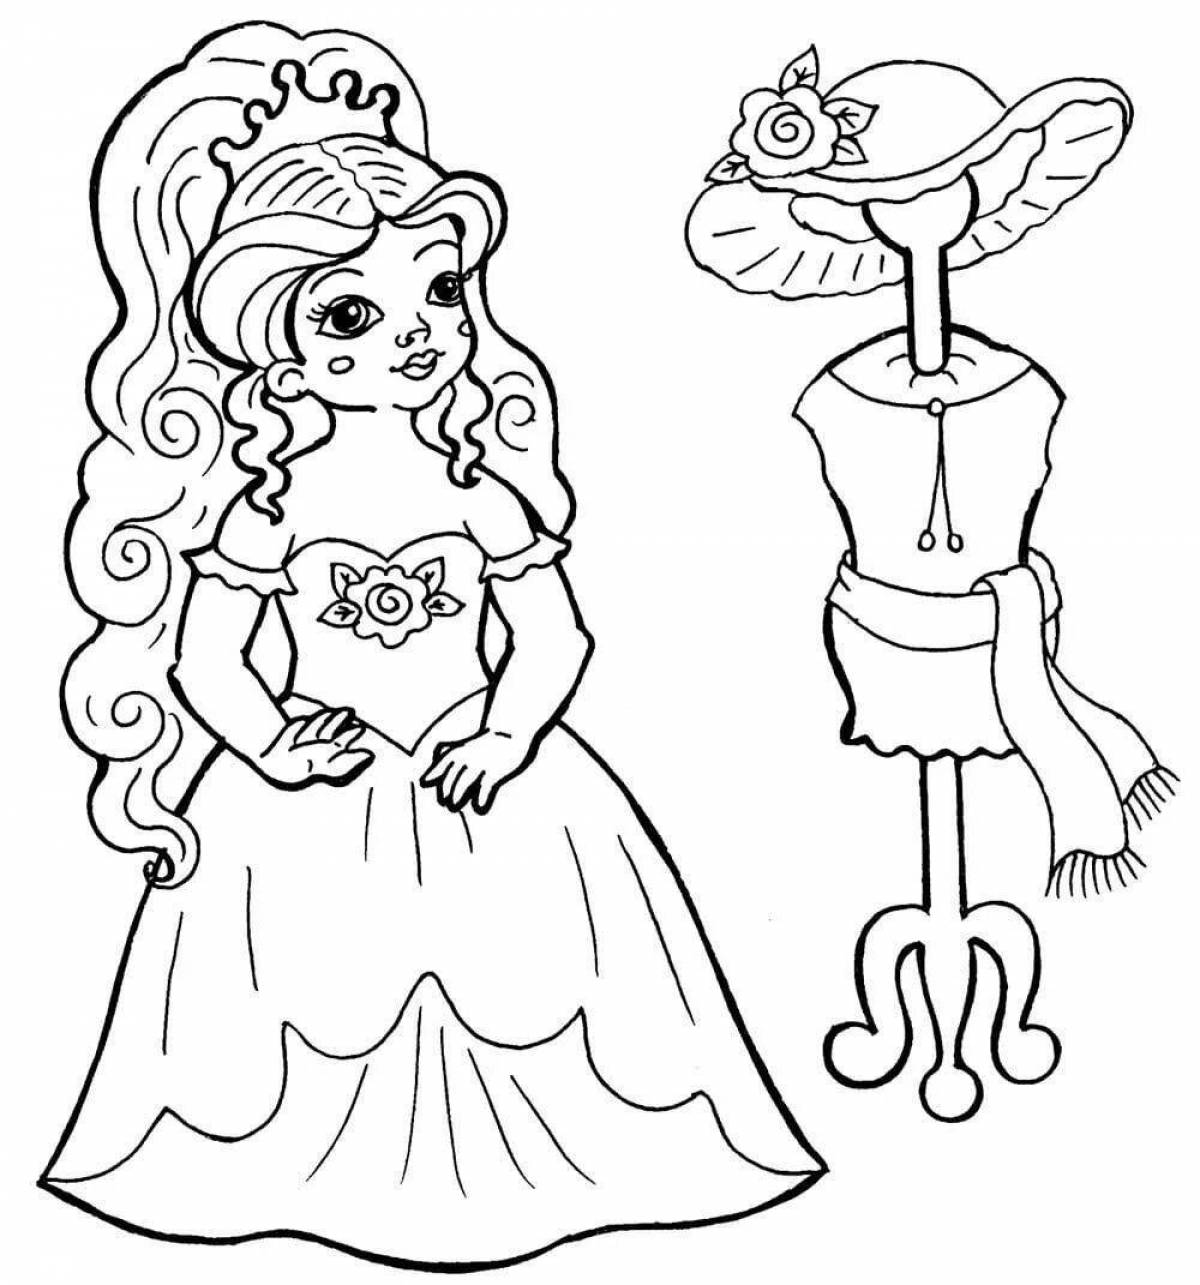 Fairytale coloring for girls 6 years old